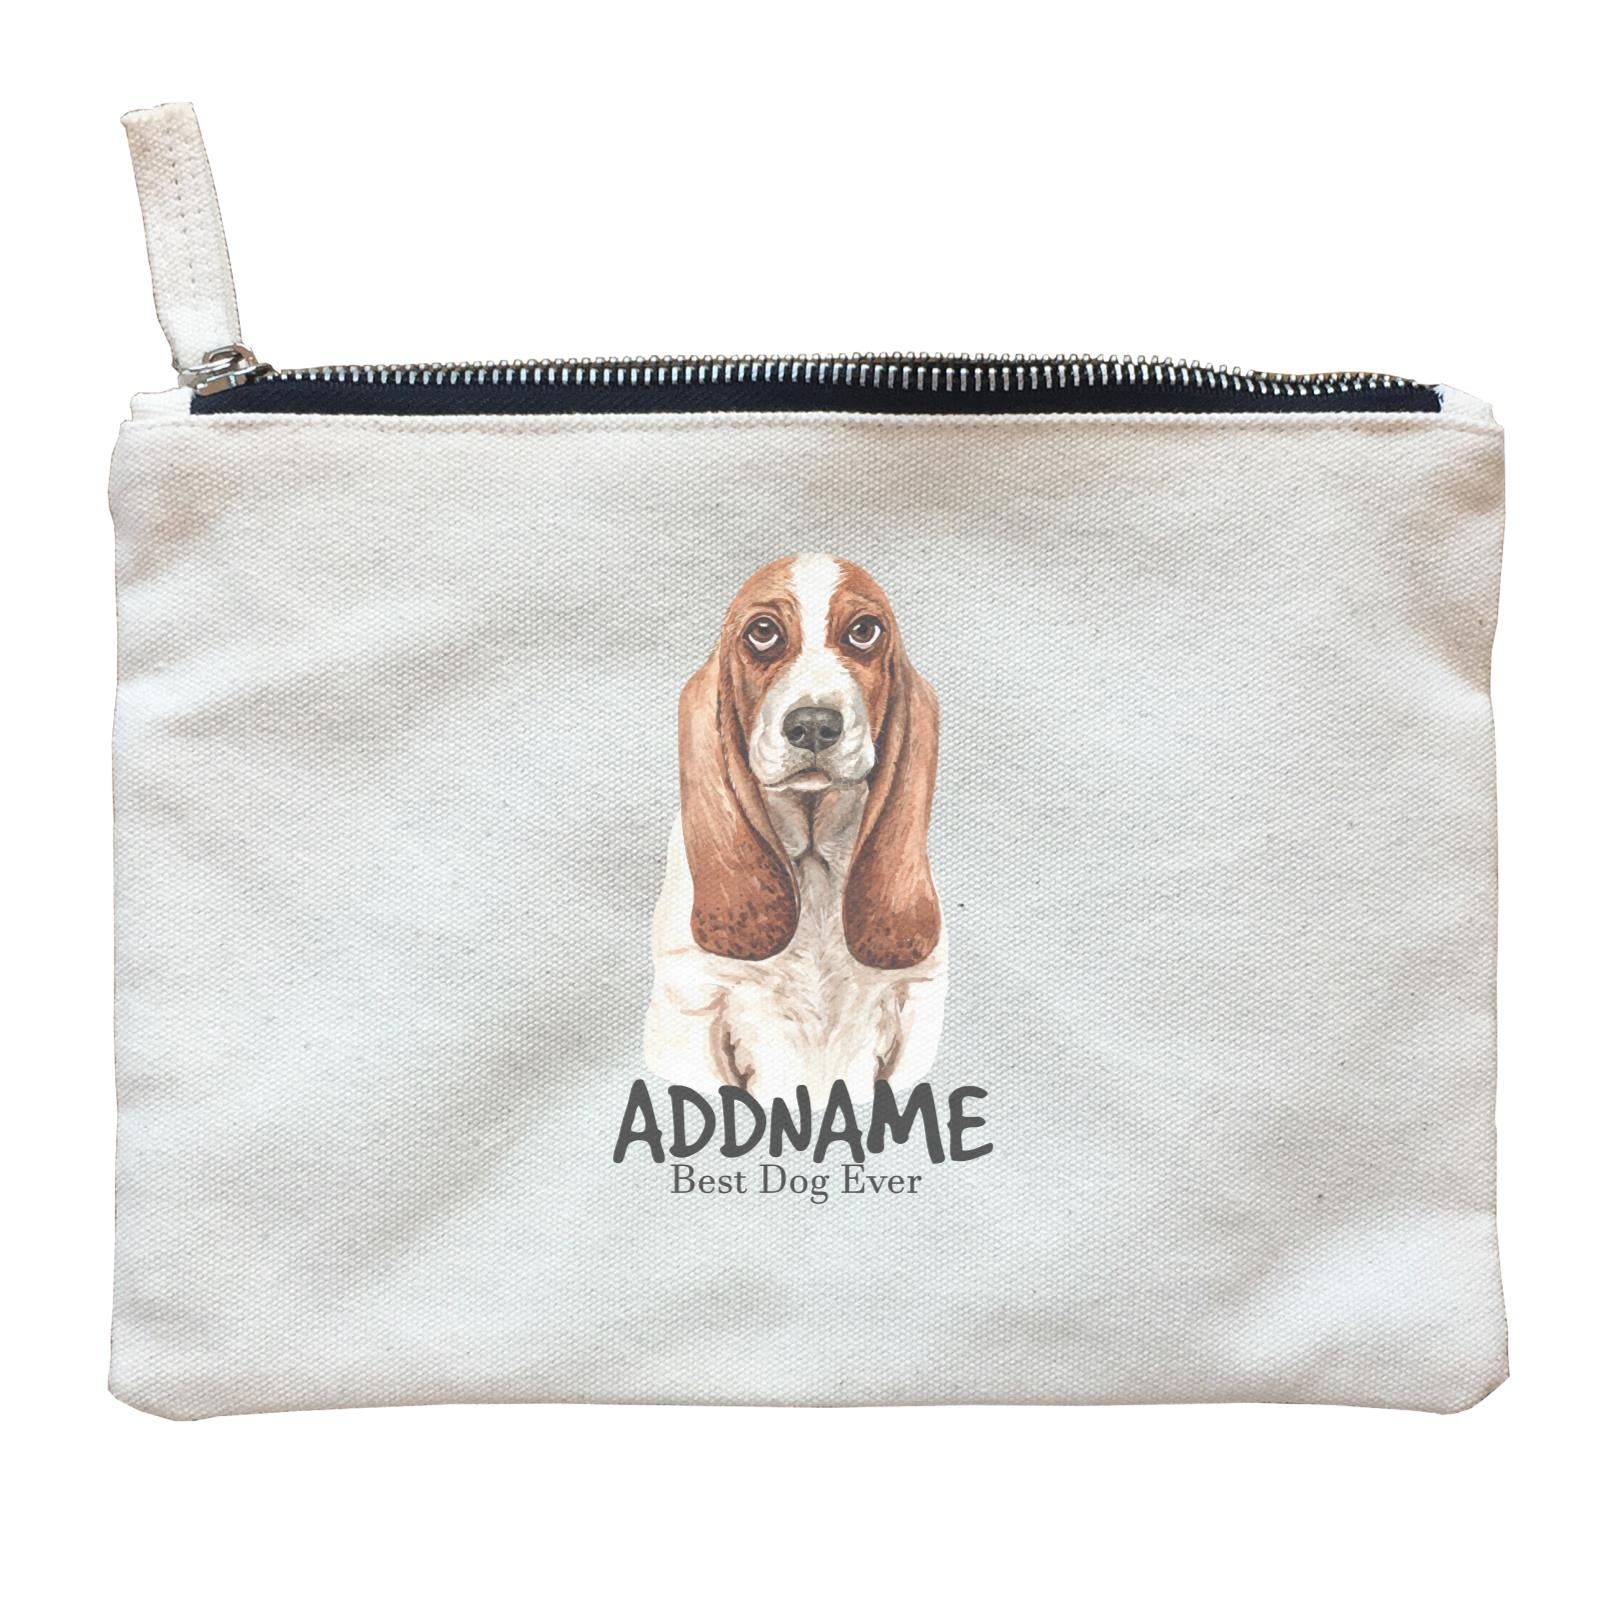 Watercolor Dog Basset Dog Best Dog Ever Addname Zipper Pouch